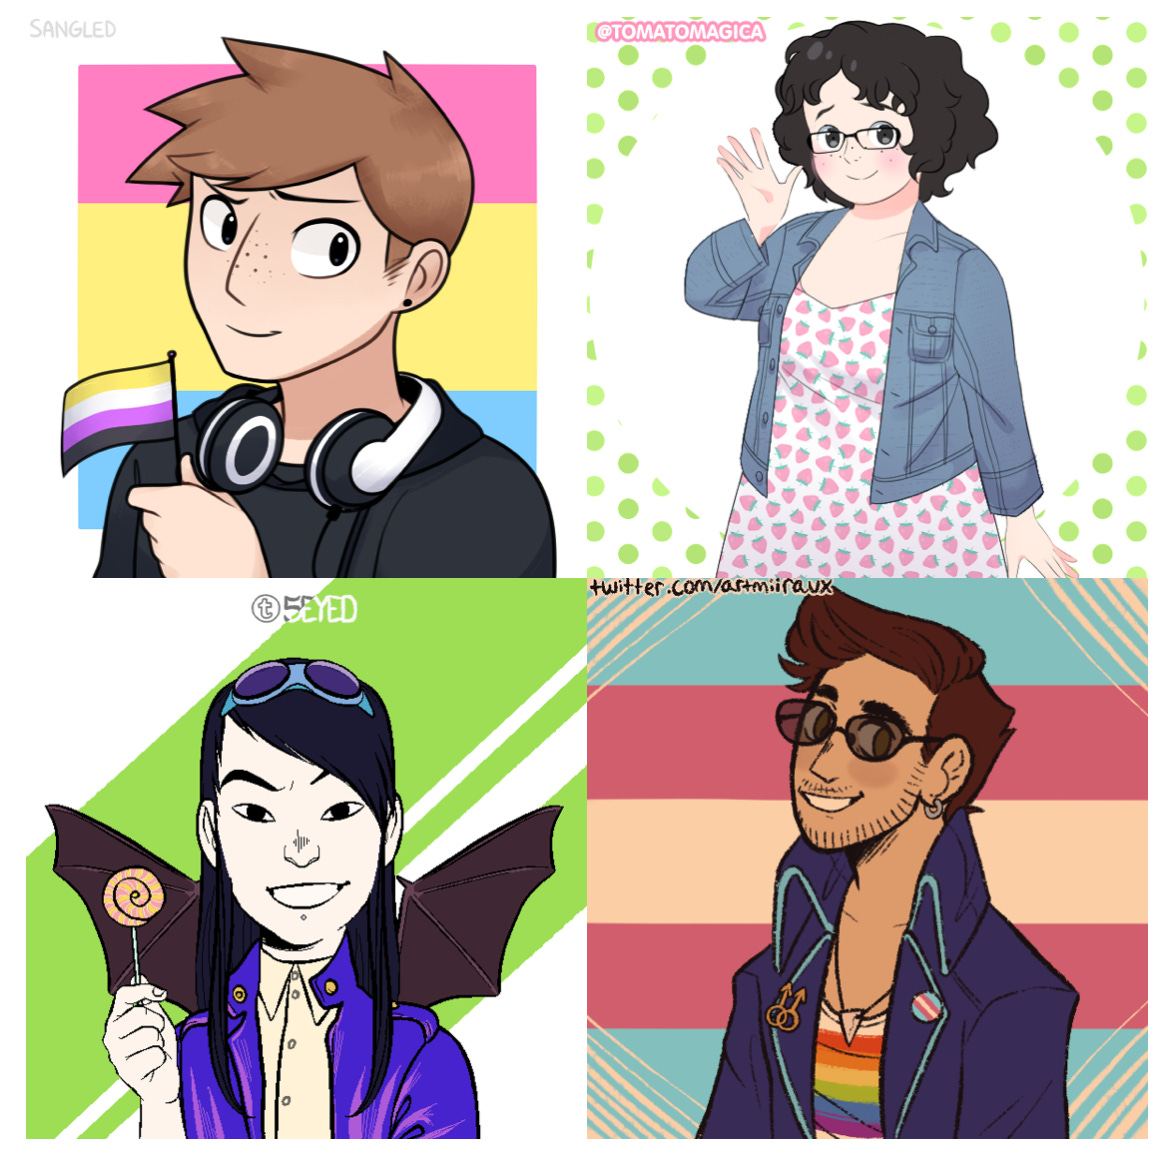 Four cartoon chracters in a square image. Created with picrew, these images show the four character of Gendervexed. Top left is Taryn, a white genderqueer person with freckles and light brown hair. Top right is Maeko, a half Japanese, half white Canadian with wavy black hair. Bottom left is Kasumi, a Japanese-Canadian with long straight black hair and a funky style of dress. Bottom right is Joshua, a white trans guy with thick brown hair and a very flamoyantly gay look. 